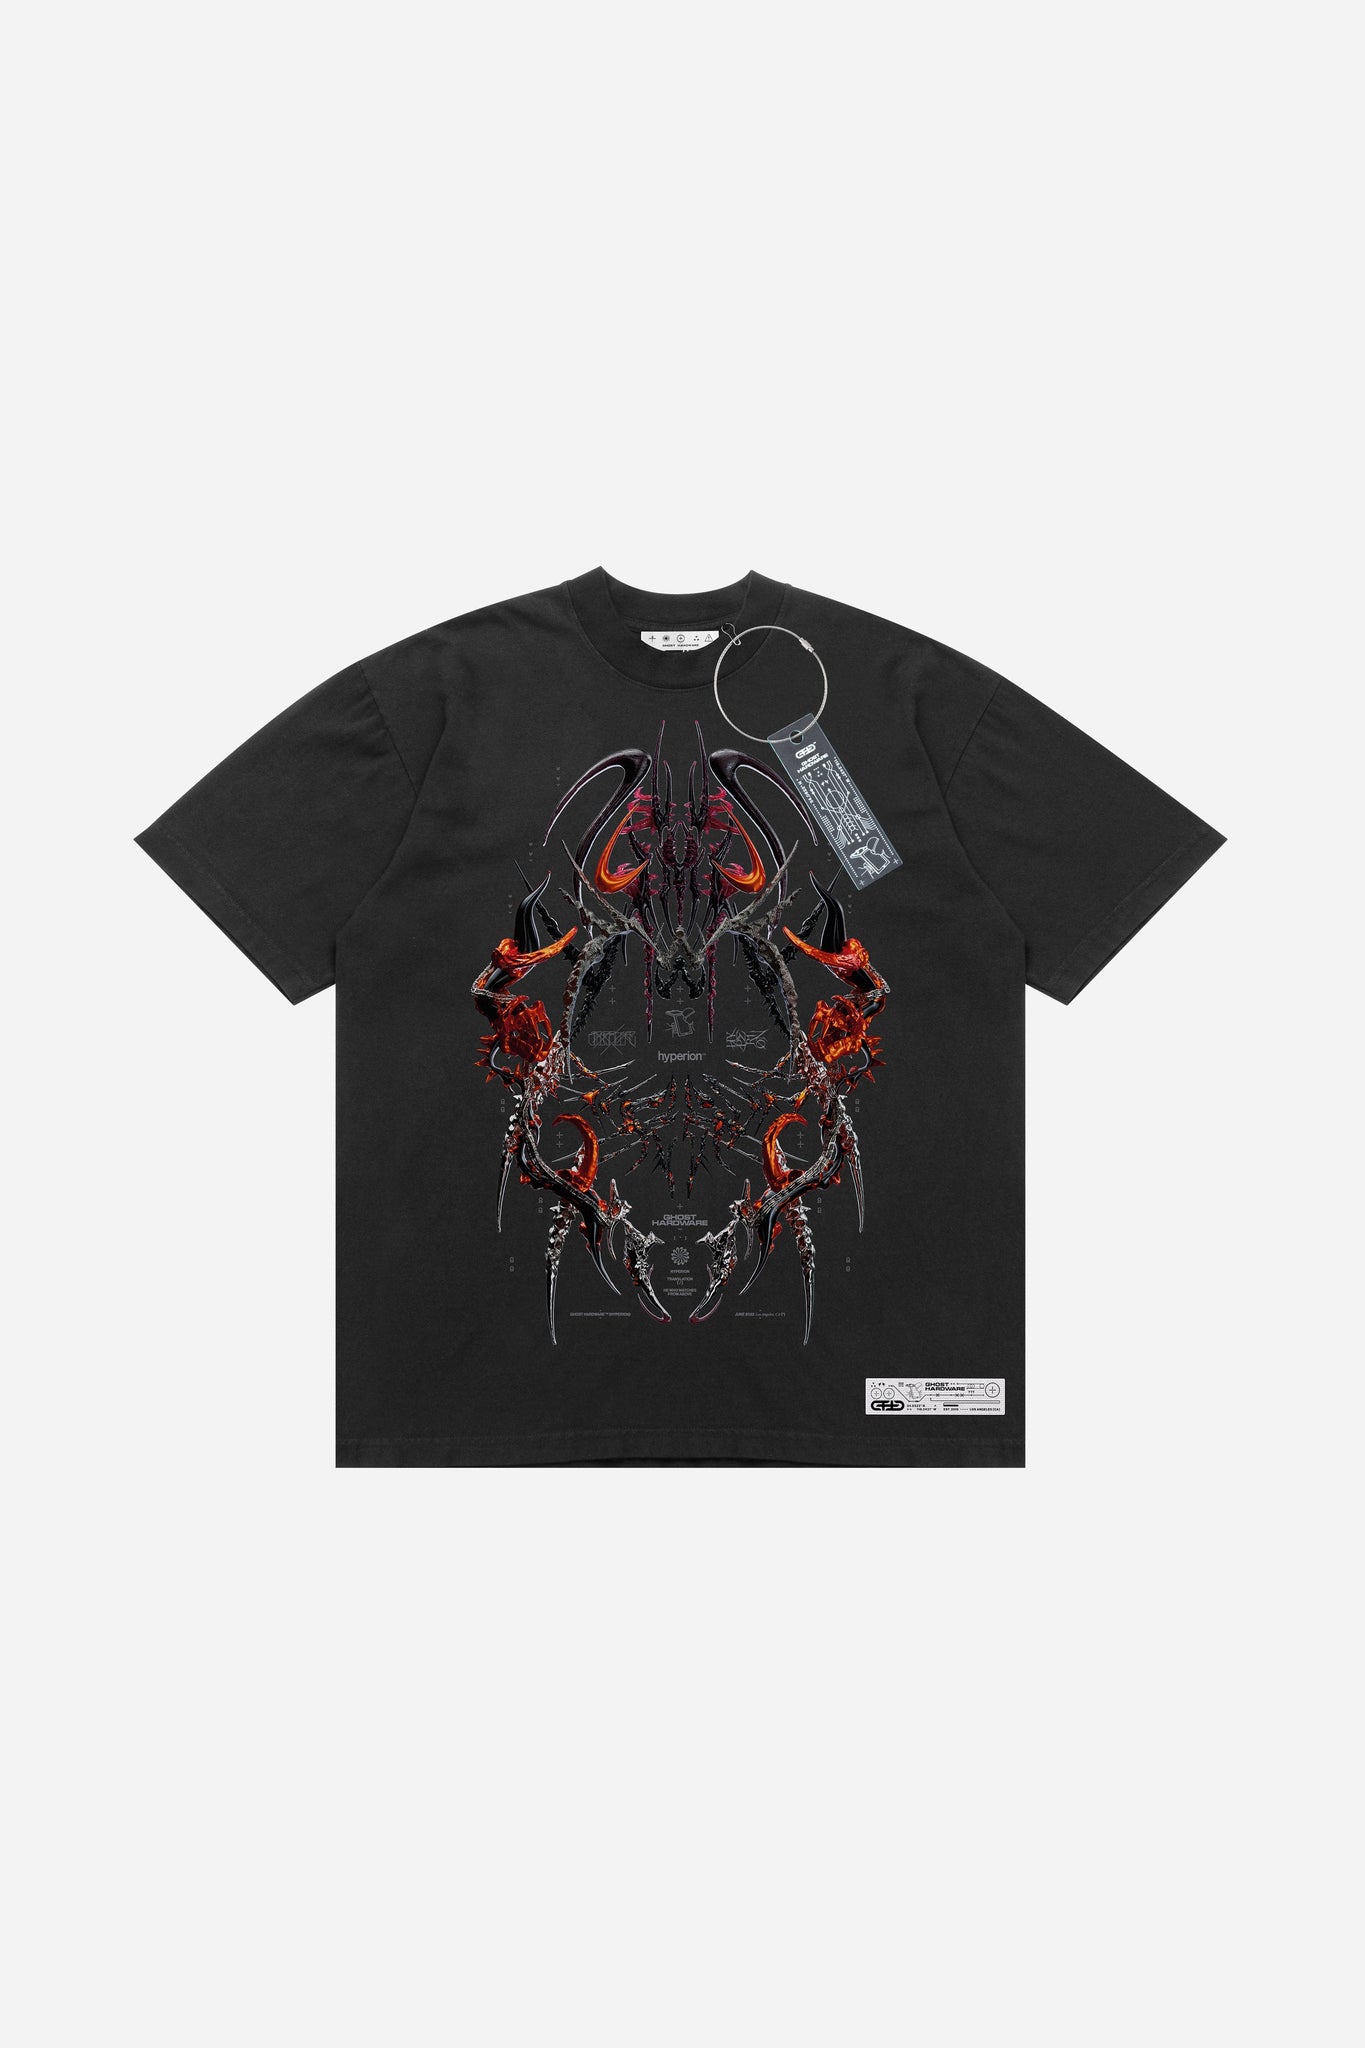 Afterlife [ patch ] Tee